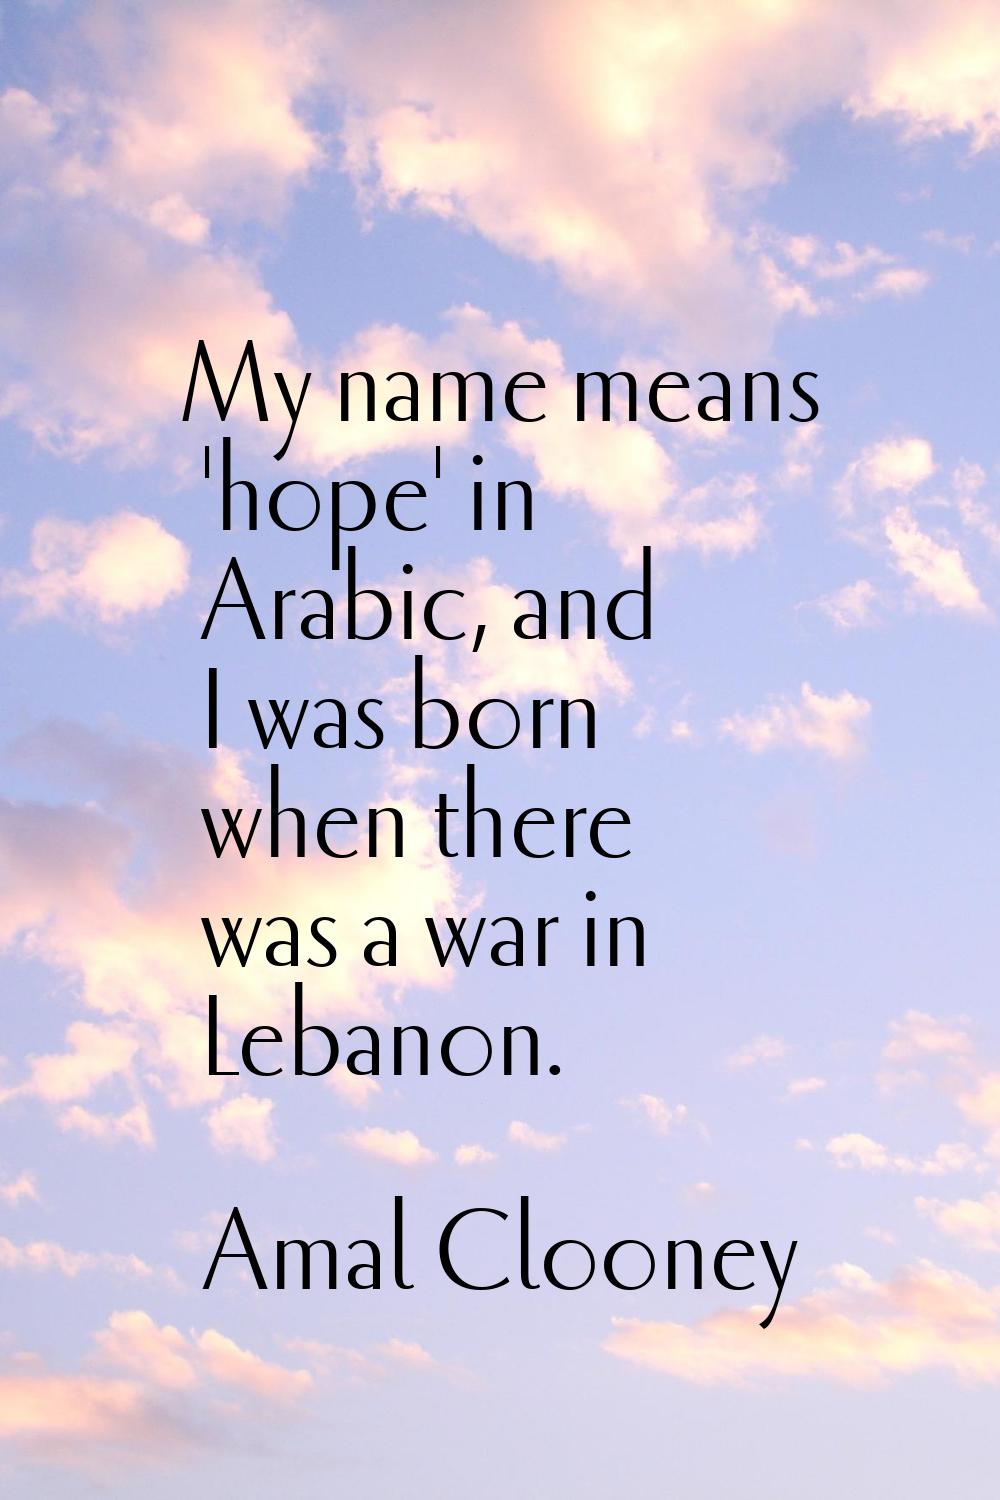 My name means 'hope' in Arabic, and I was born when there was a war in Lebanon.